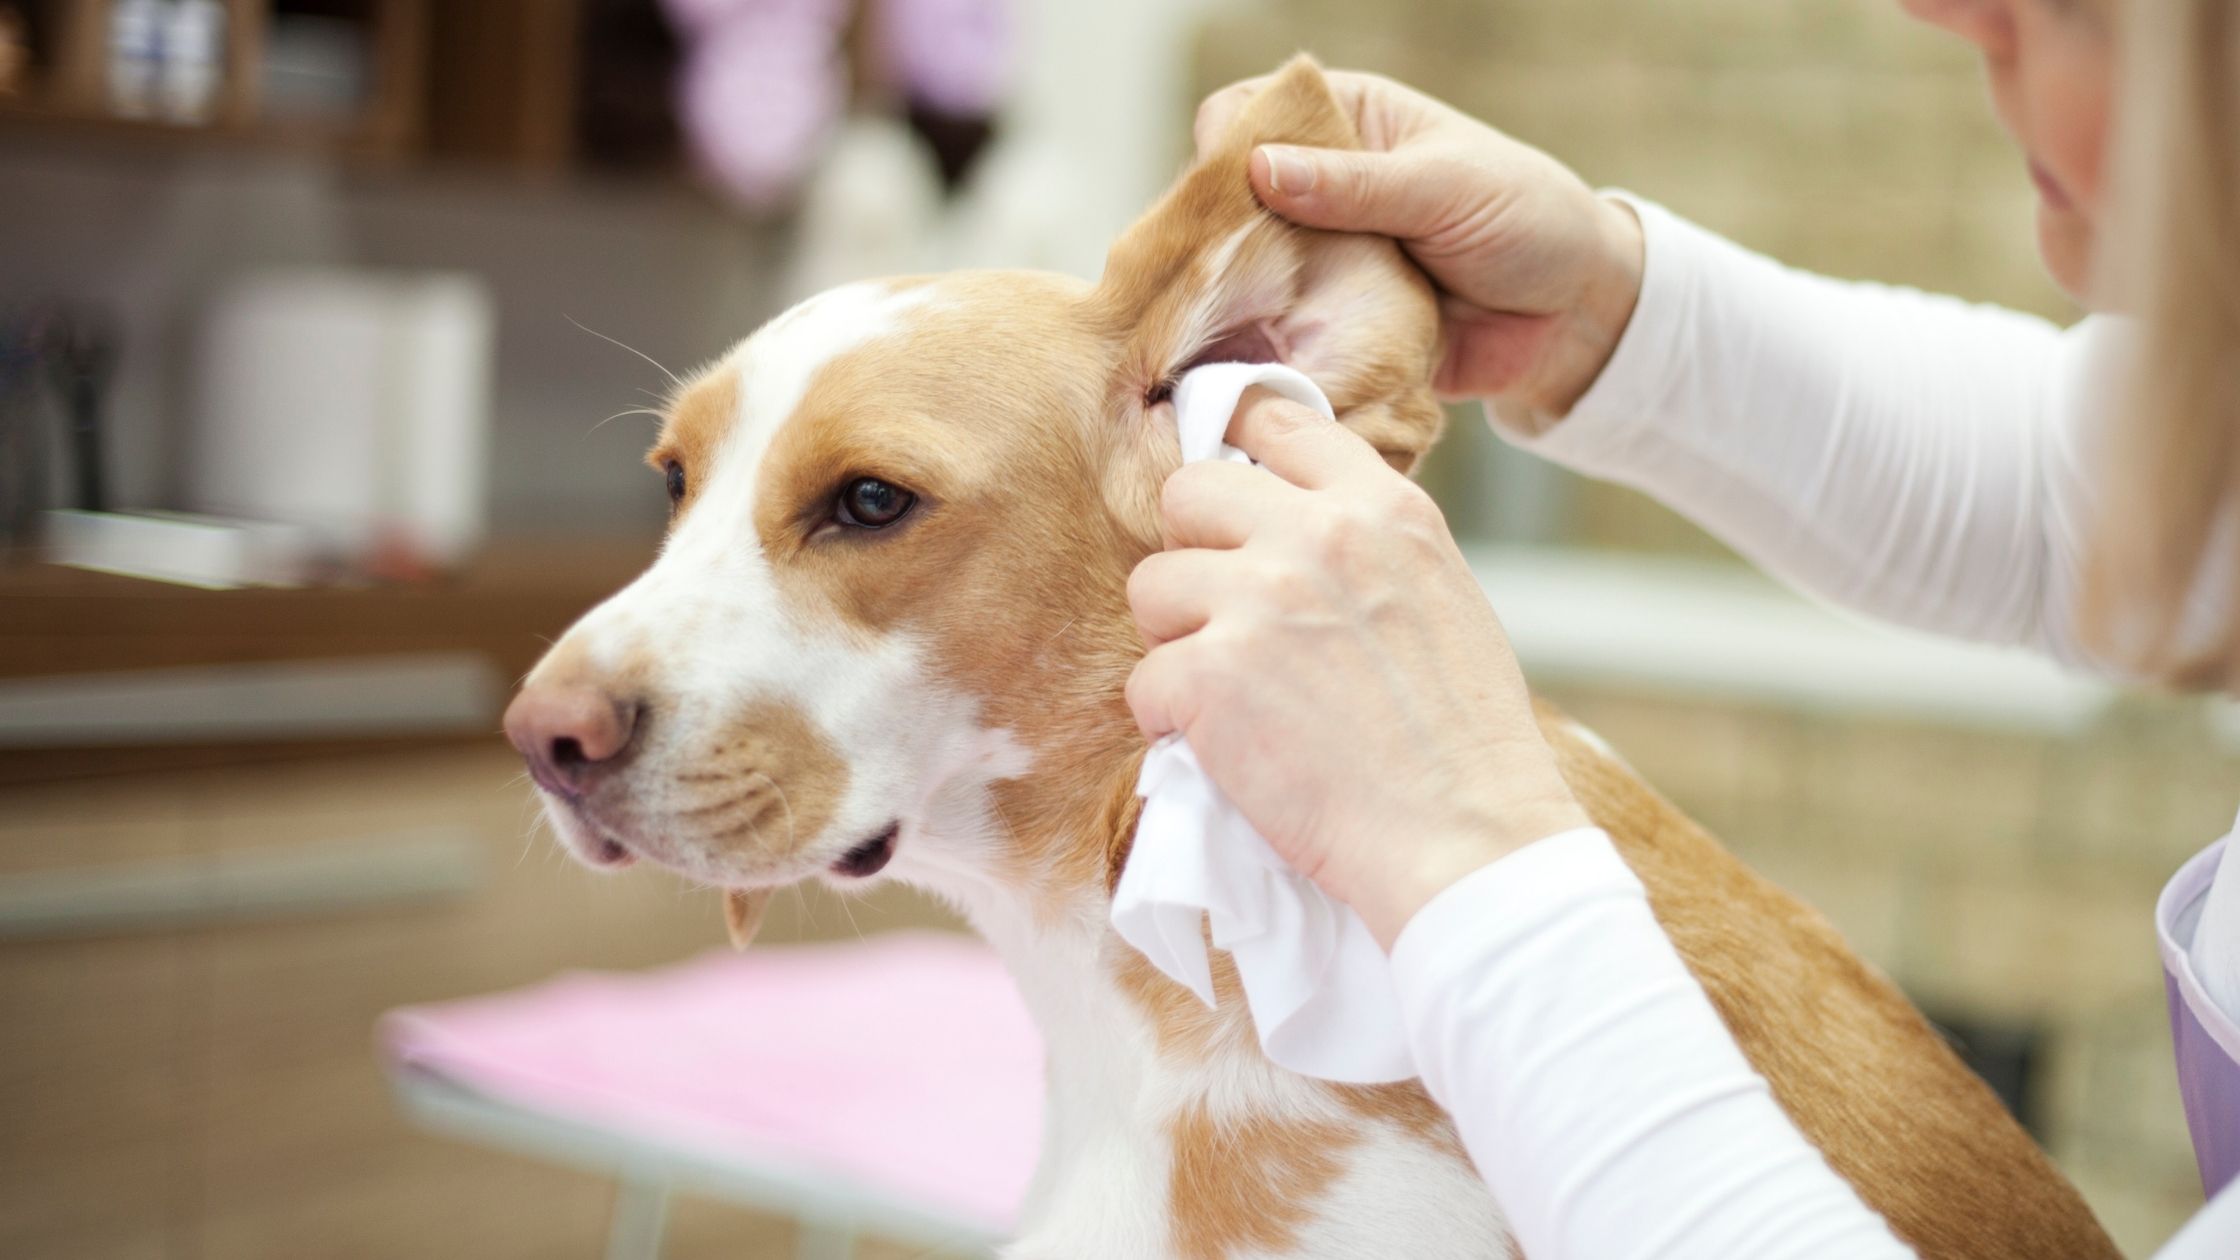 How To Use Essential Oils To Cure A Dog’s Ear Infection